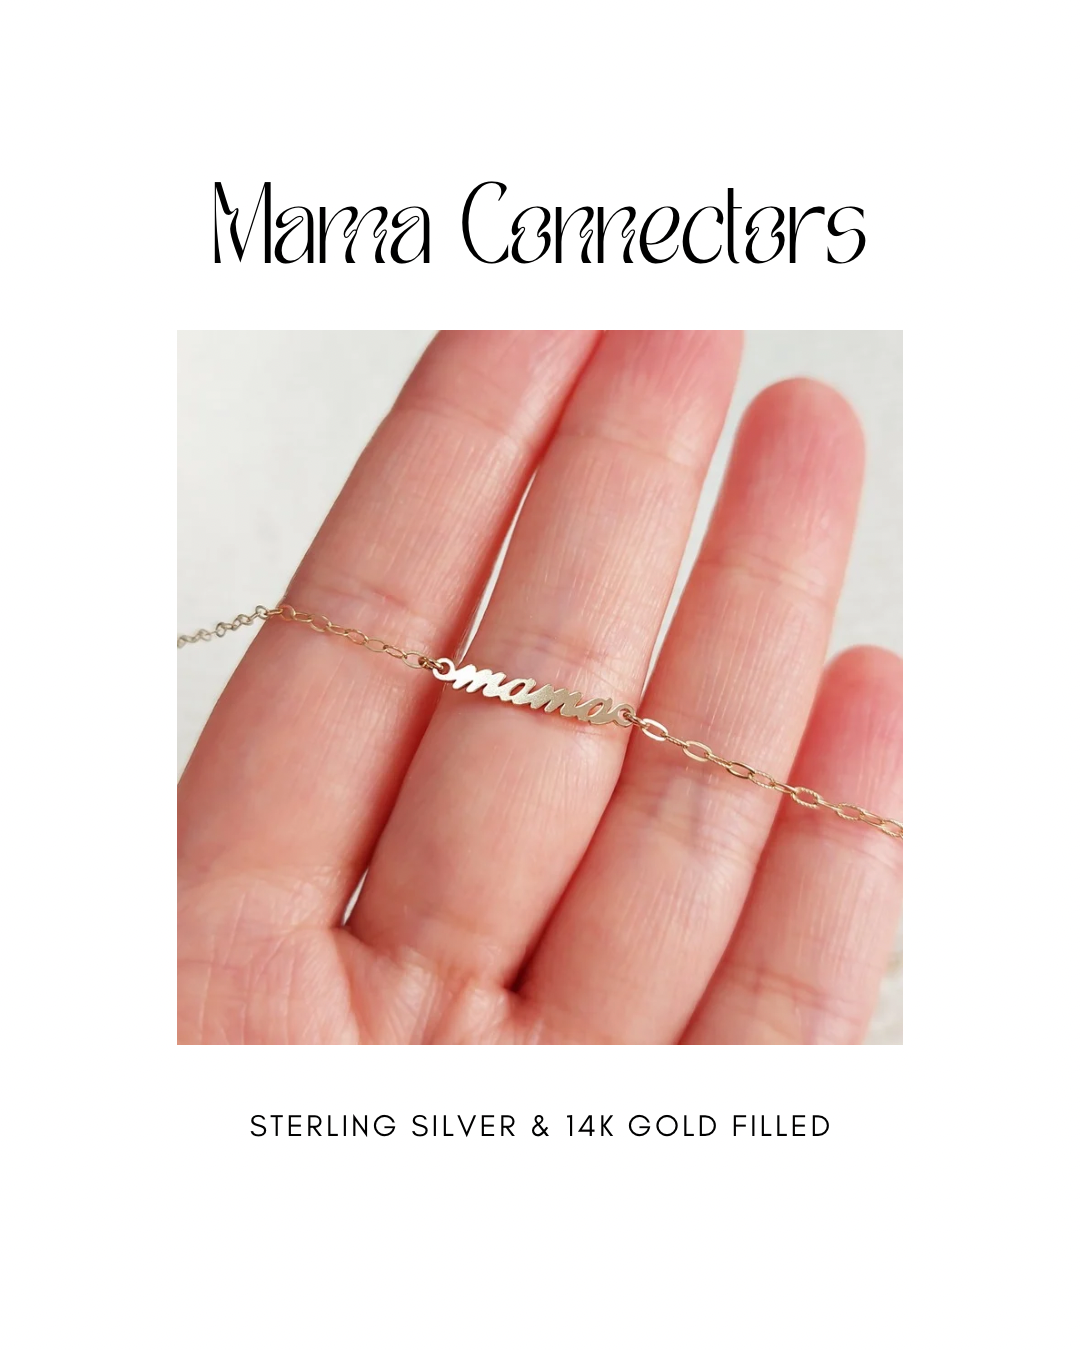 Mama Connector Charm add-on for Permanent Jewelry // Pre-order for IN-PERSON events only 🫶